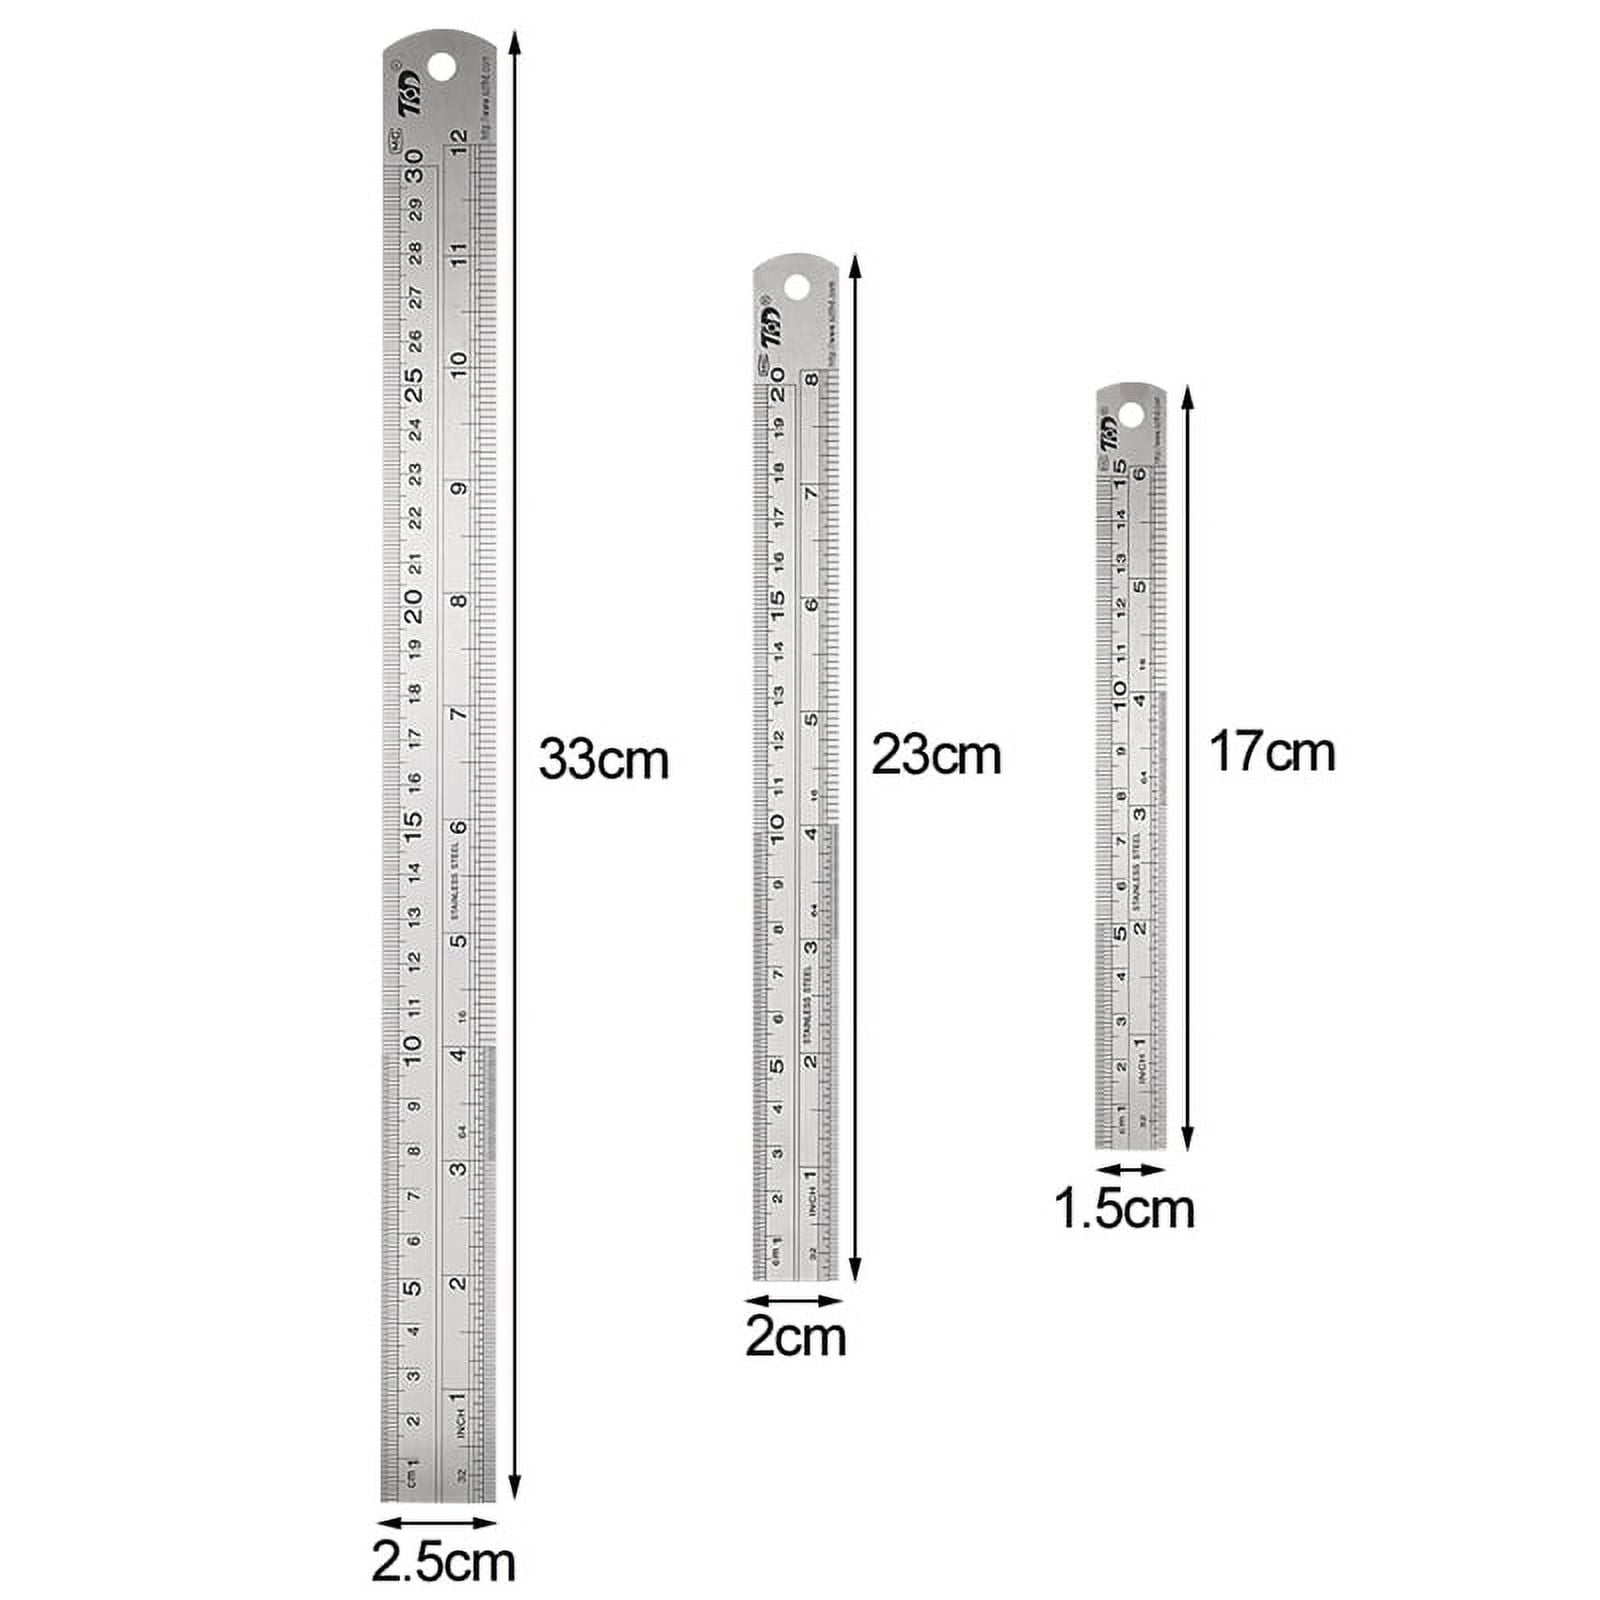 Grizzly T34082 - Center Finding Ruler Set, 3 Pc.